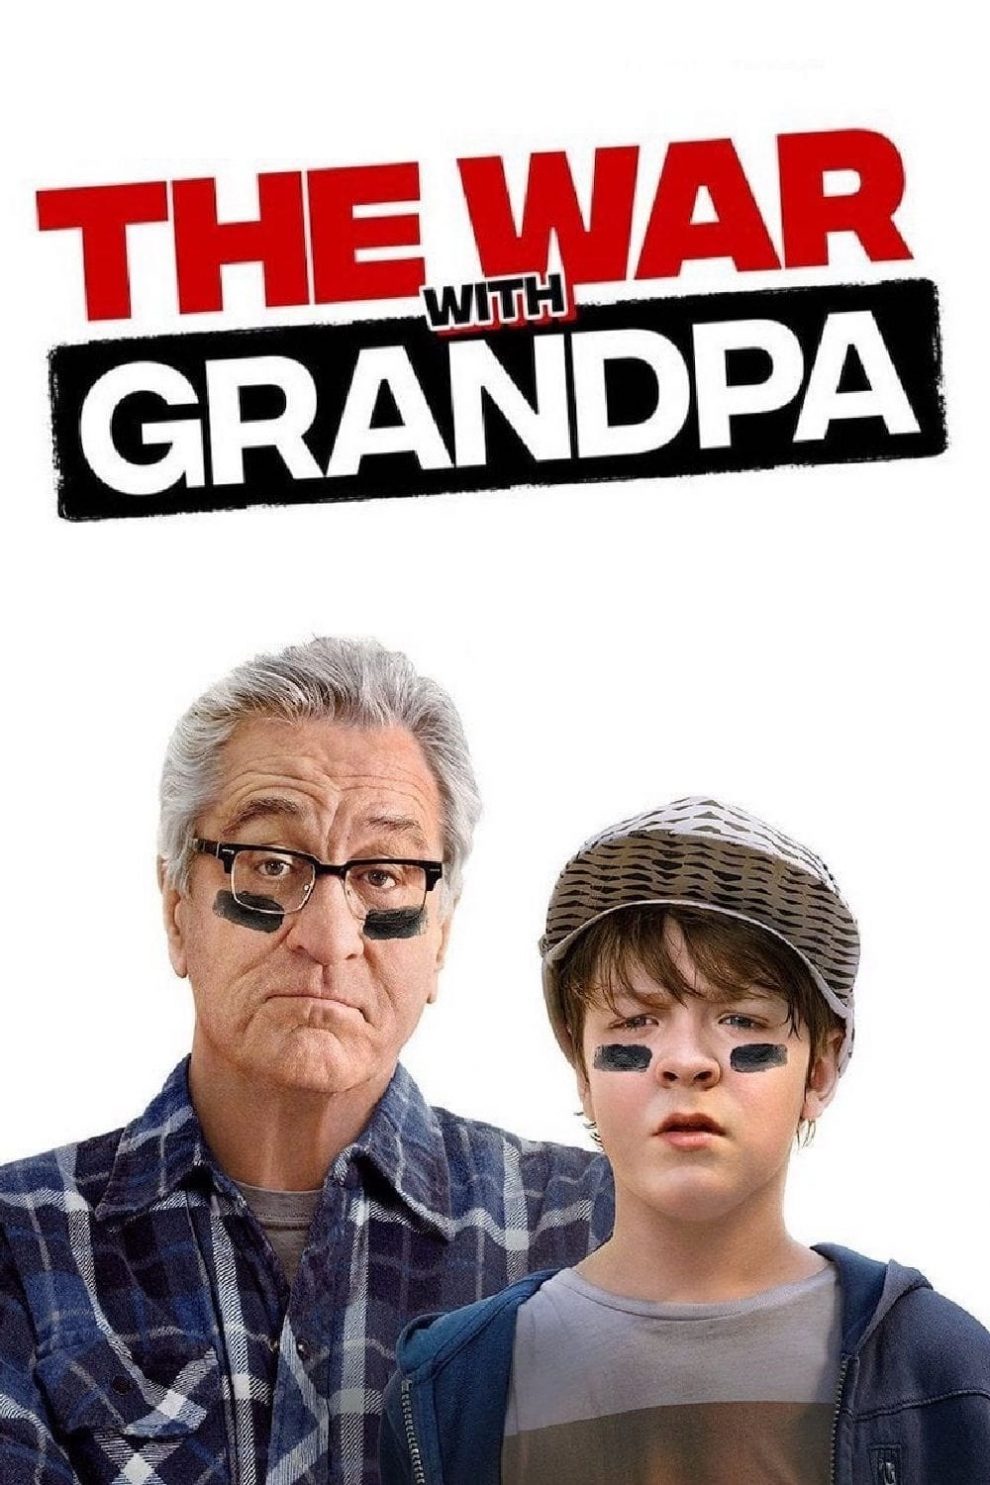 Poster for the movie "The War with Grandpa"